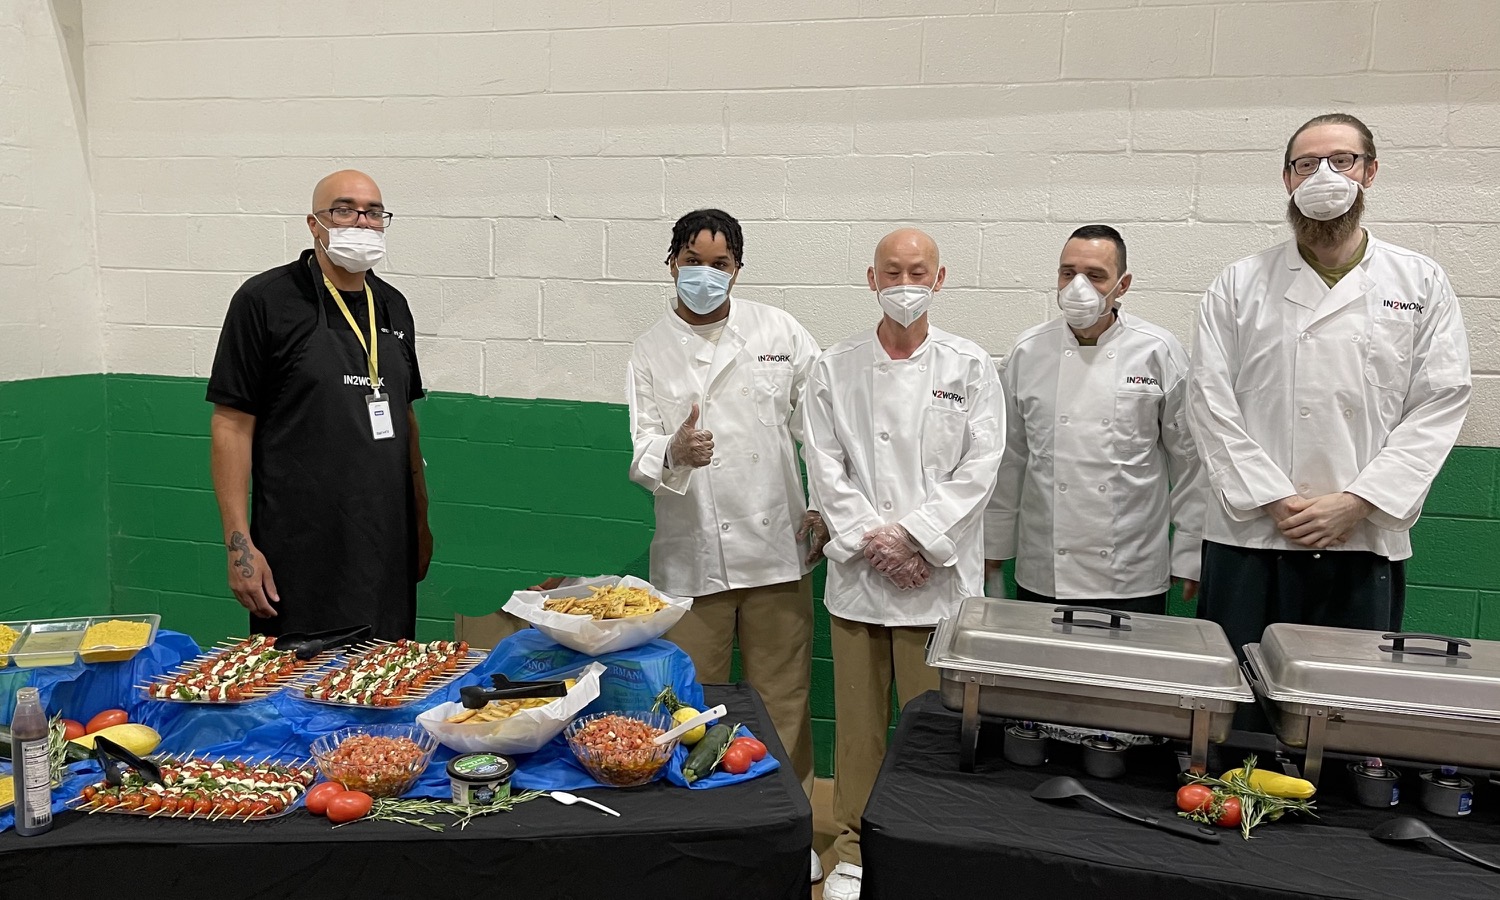 In2Work instructor Brandon Lewis of Aramark, at left, and his students McKinley Moody, Quin Ngoc Rudin, Richard Levin and Mitchell Thompson with the buffet they created for the graduation celebration